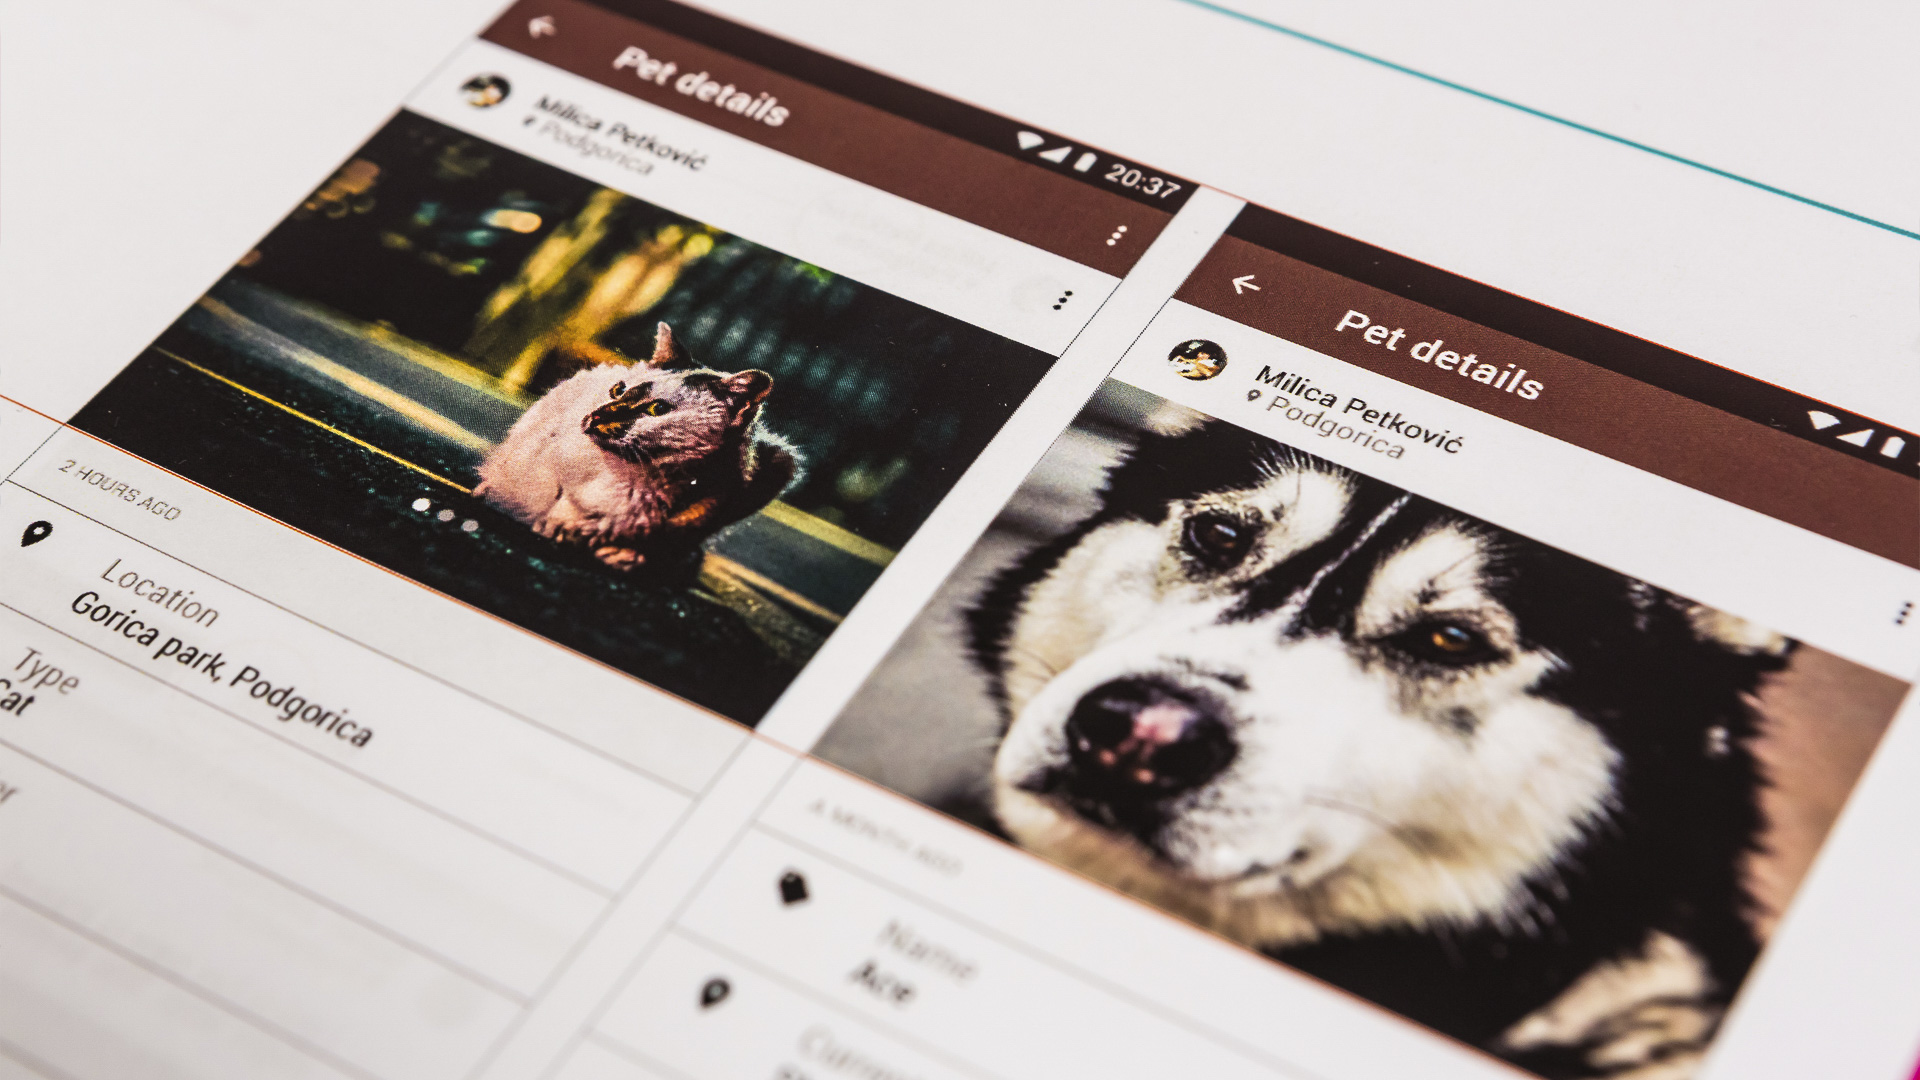 Pet shop app design by Irina Tomic shown on tablet device